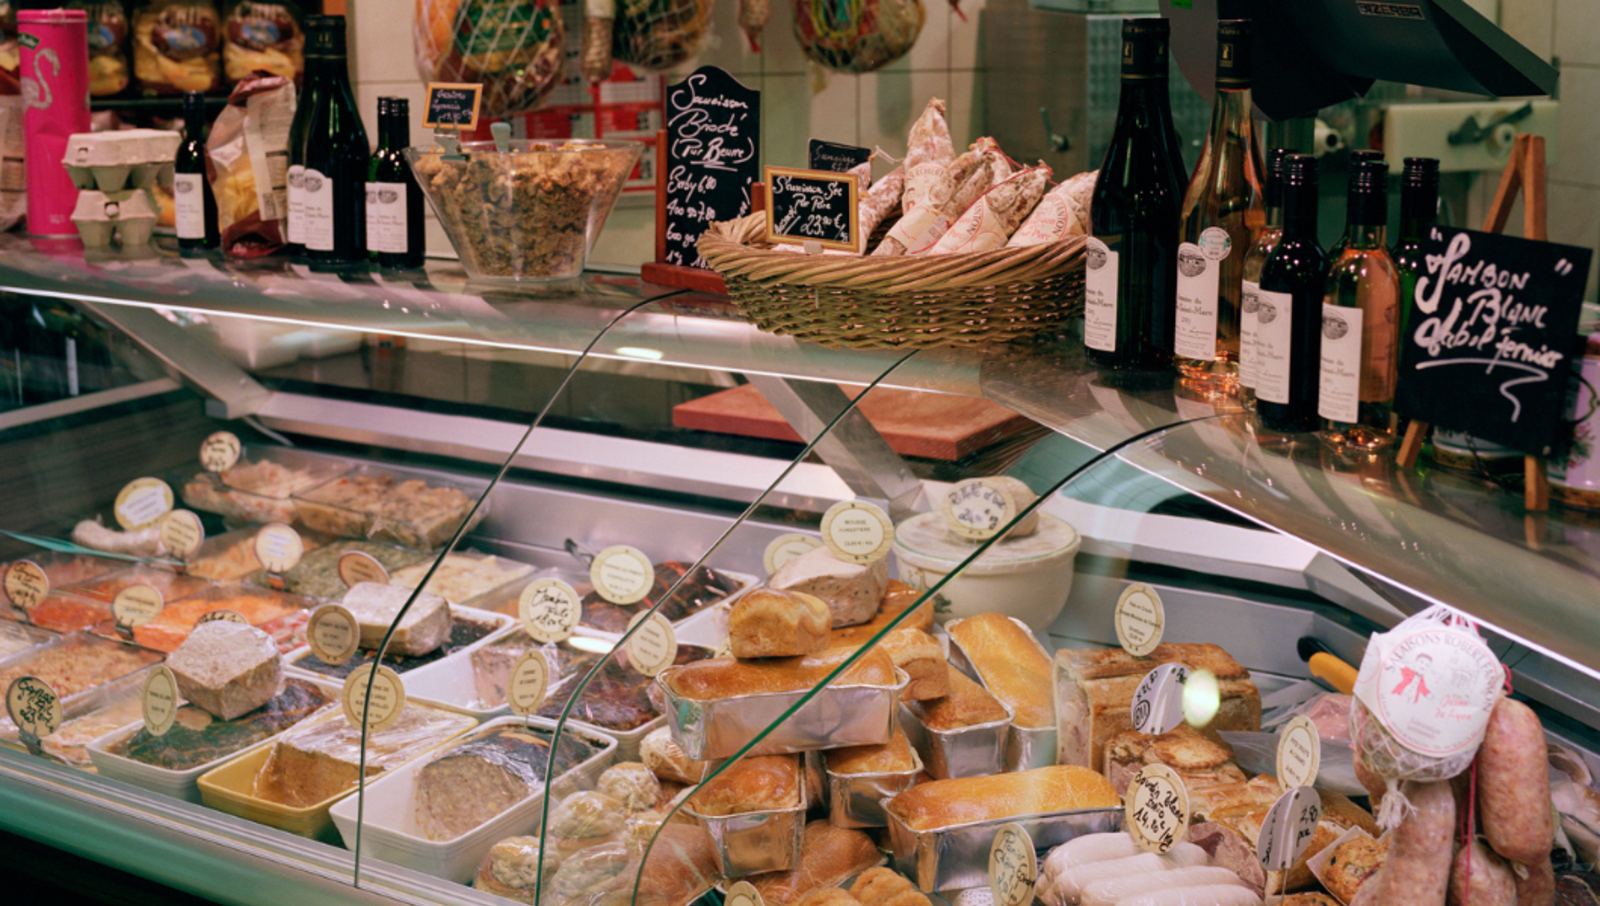 Deli with lots of different meats, cheeses and bread in cabinet and on counter